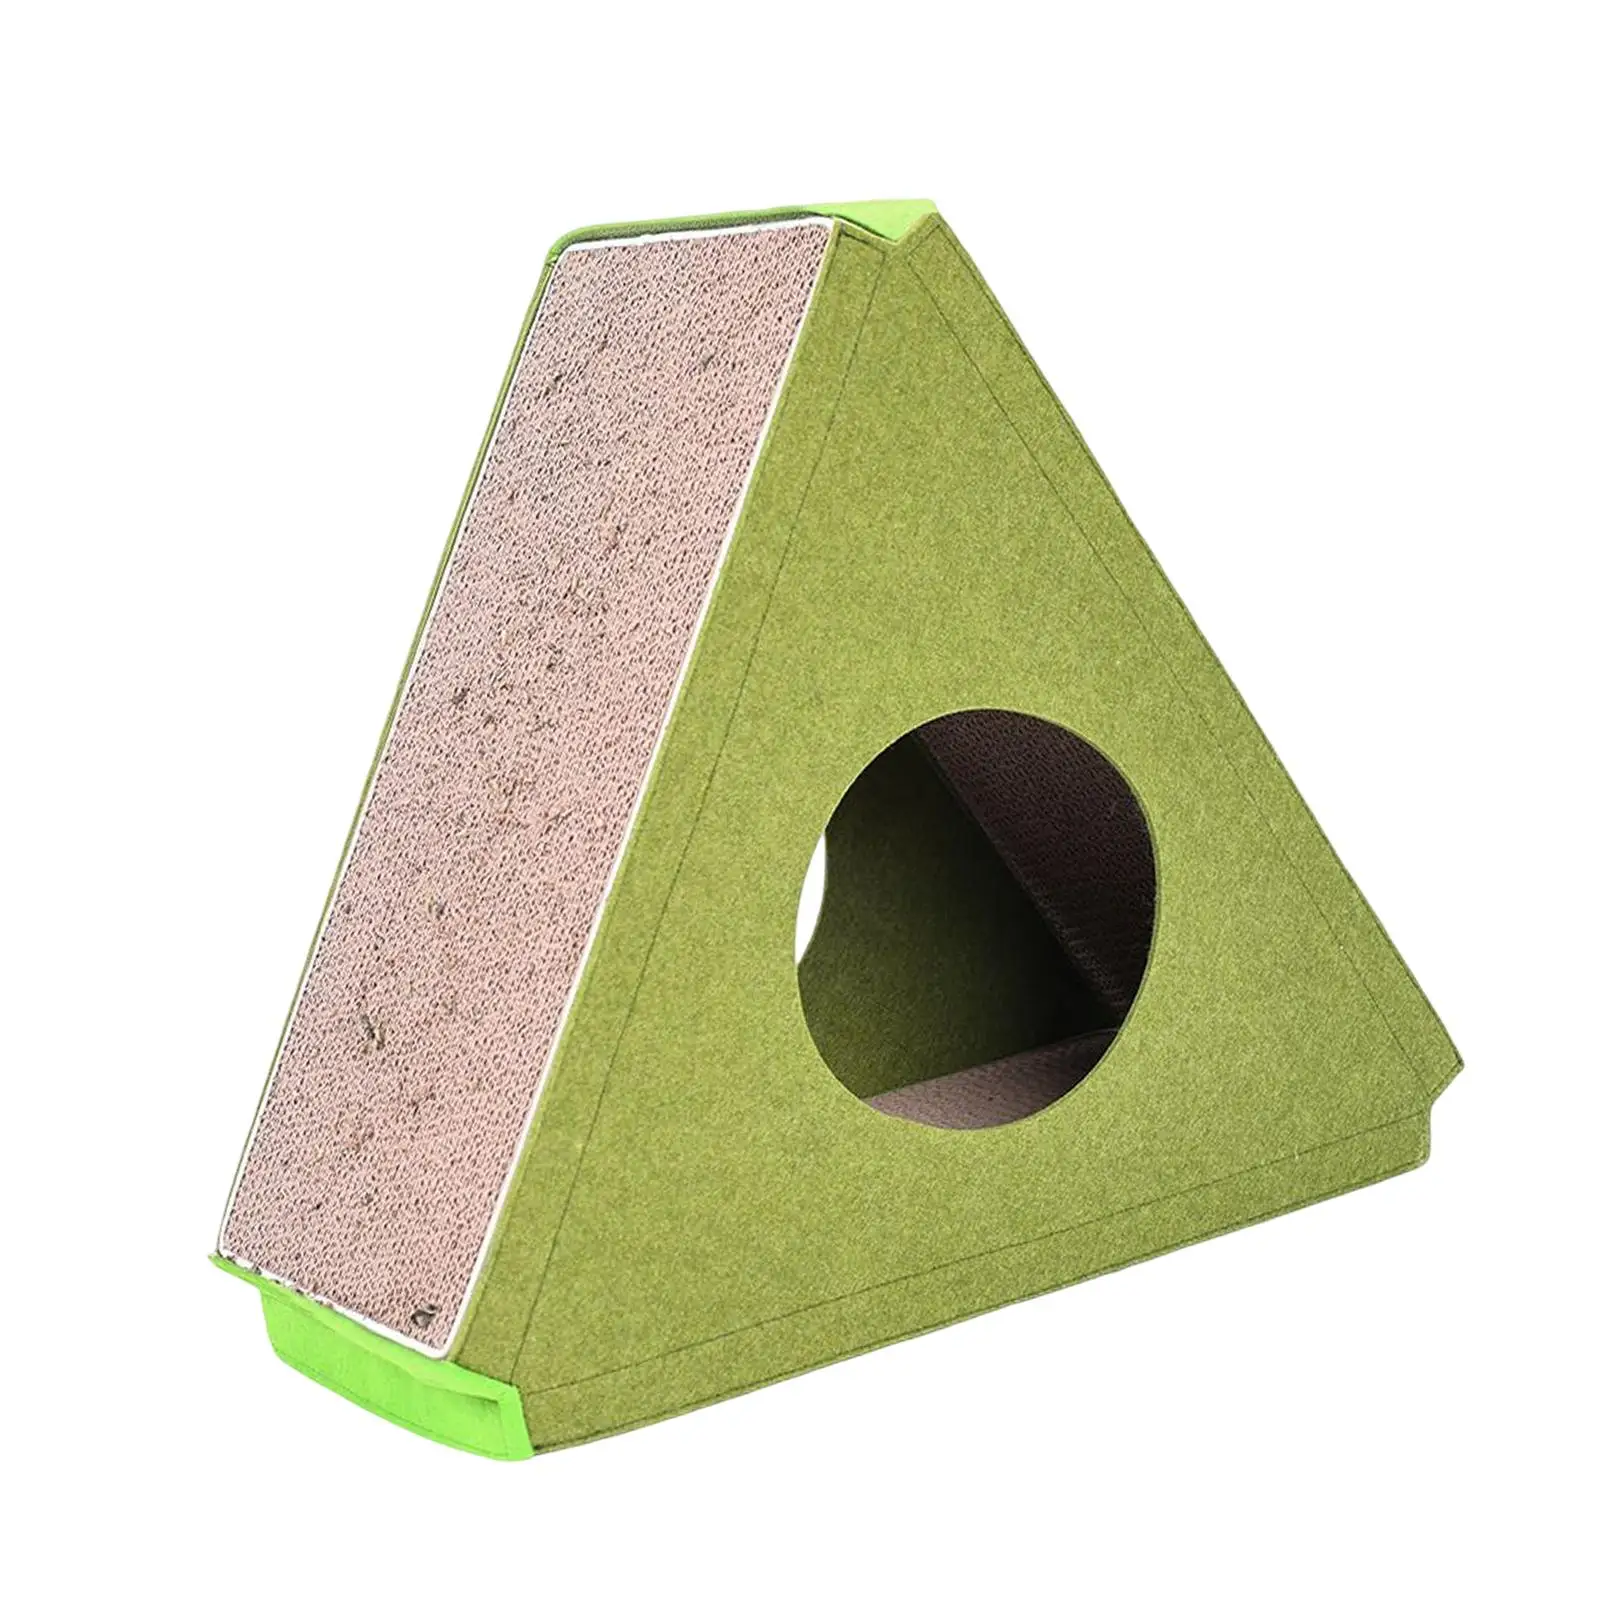 Triangle Cat Scratch Pad Lounge Bed Durable Grind Claws Thicken Corrugated Paper Kitten Scratcher Cardboard